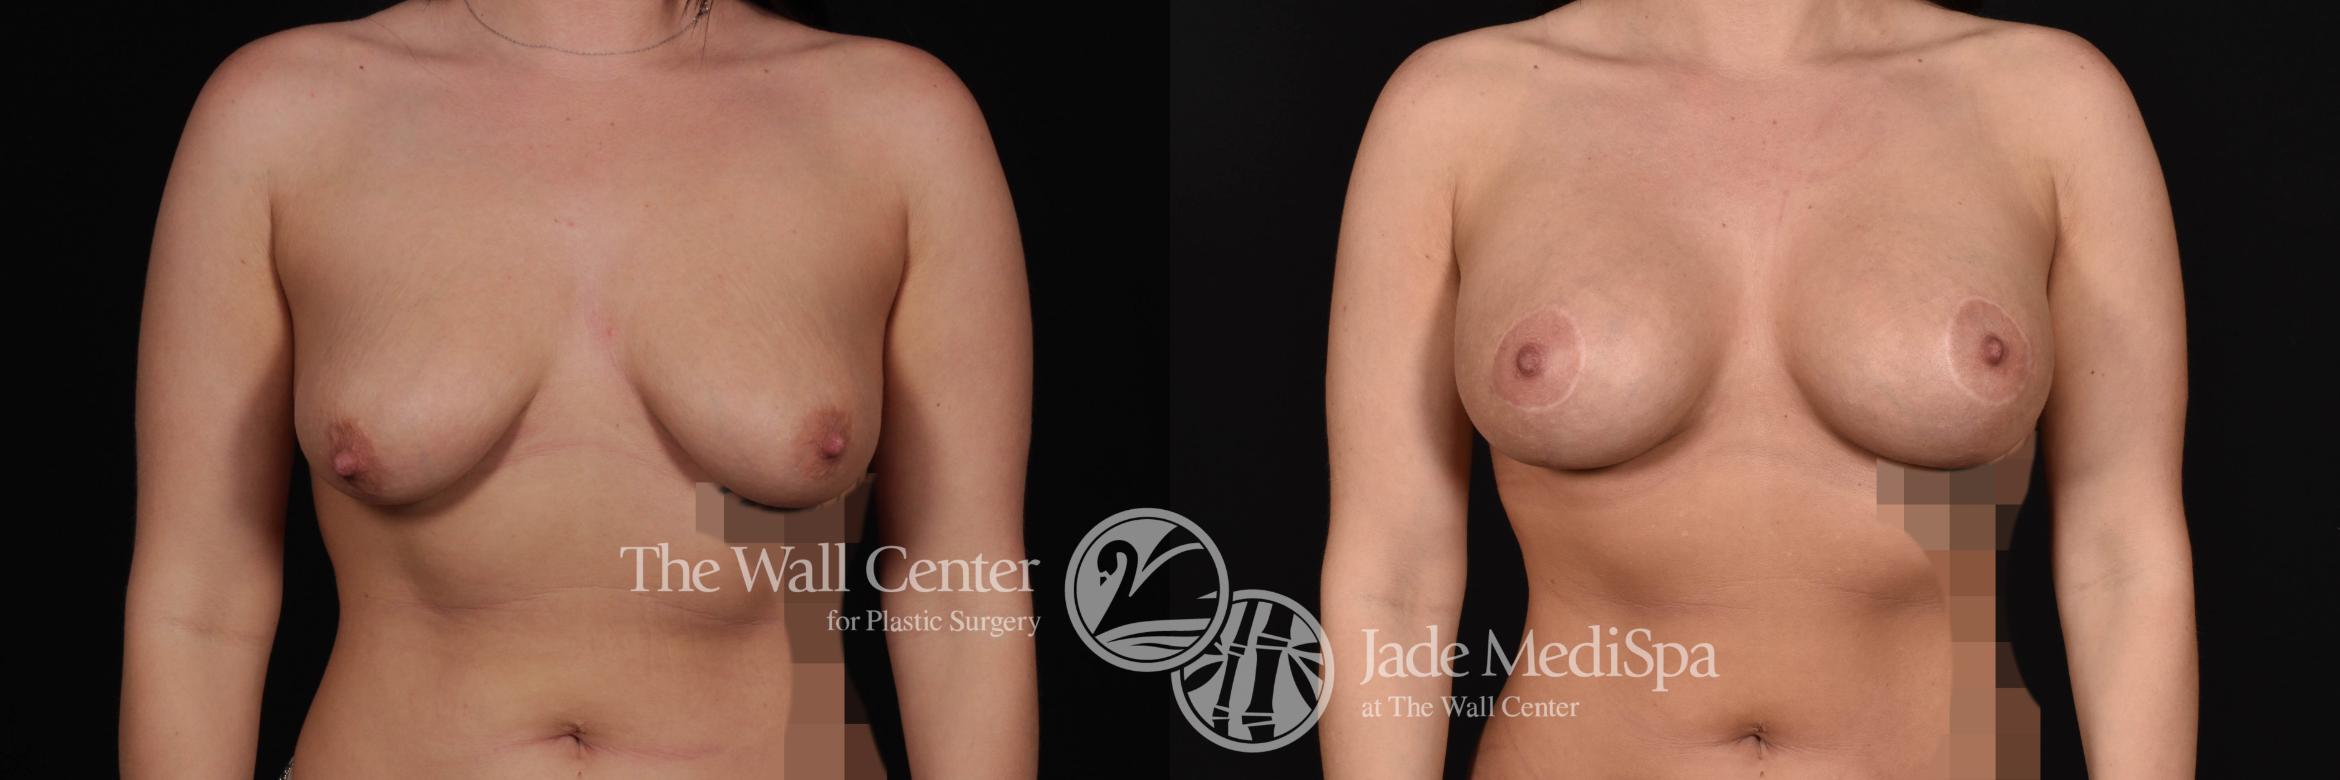 Breast Aug with Lift Front Photo, Shreveport, Louisiana, The Wall Center for Plastic Surgery, Case 835